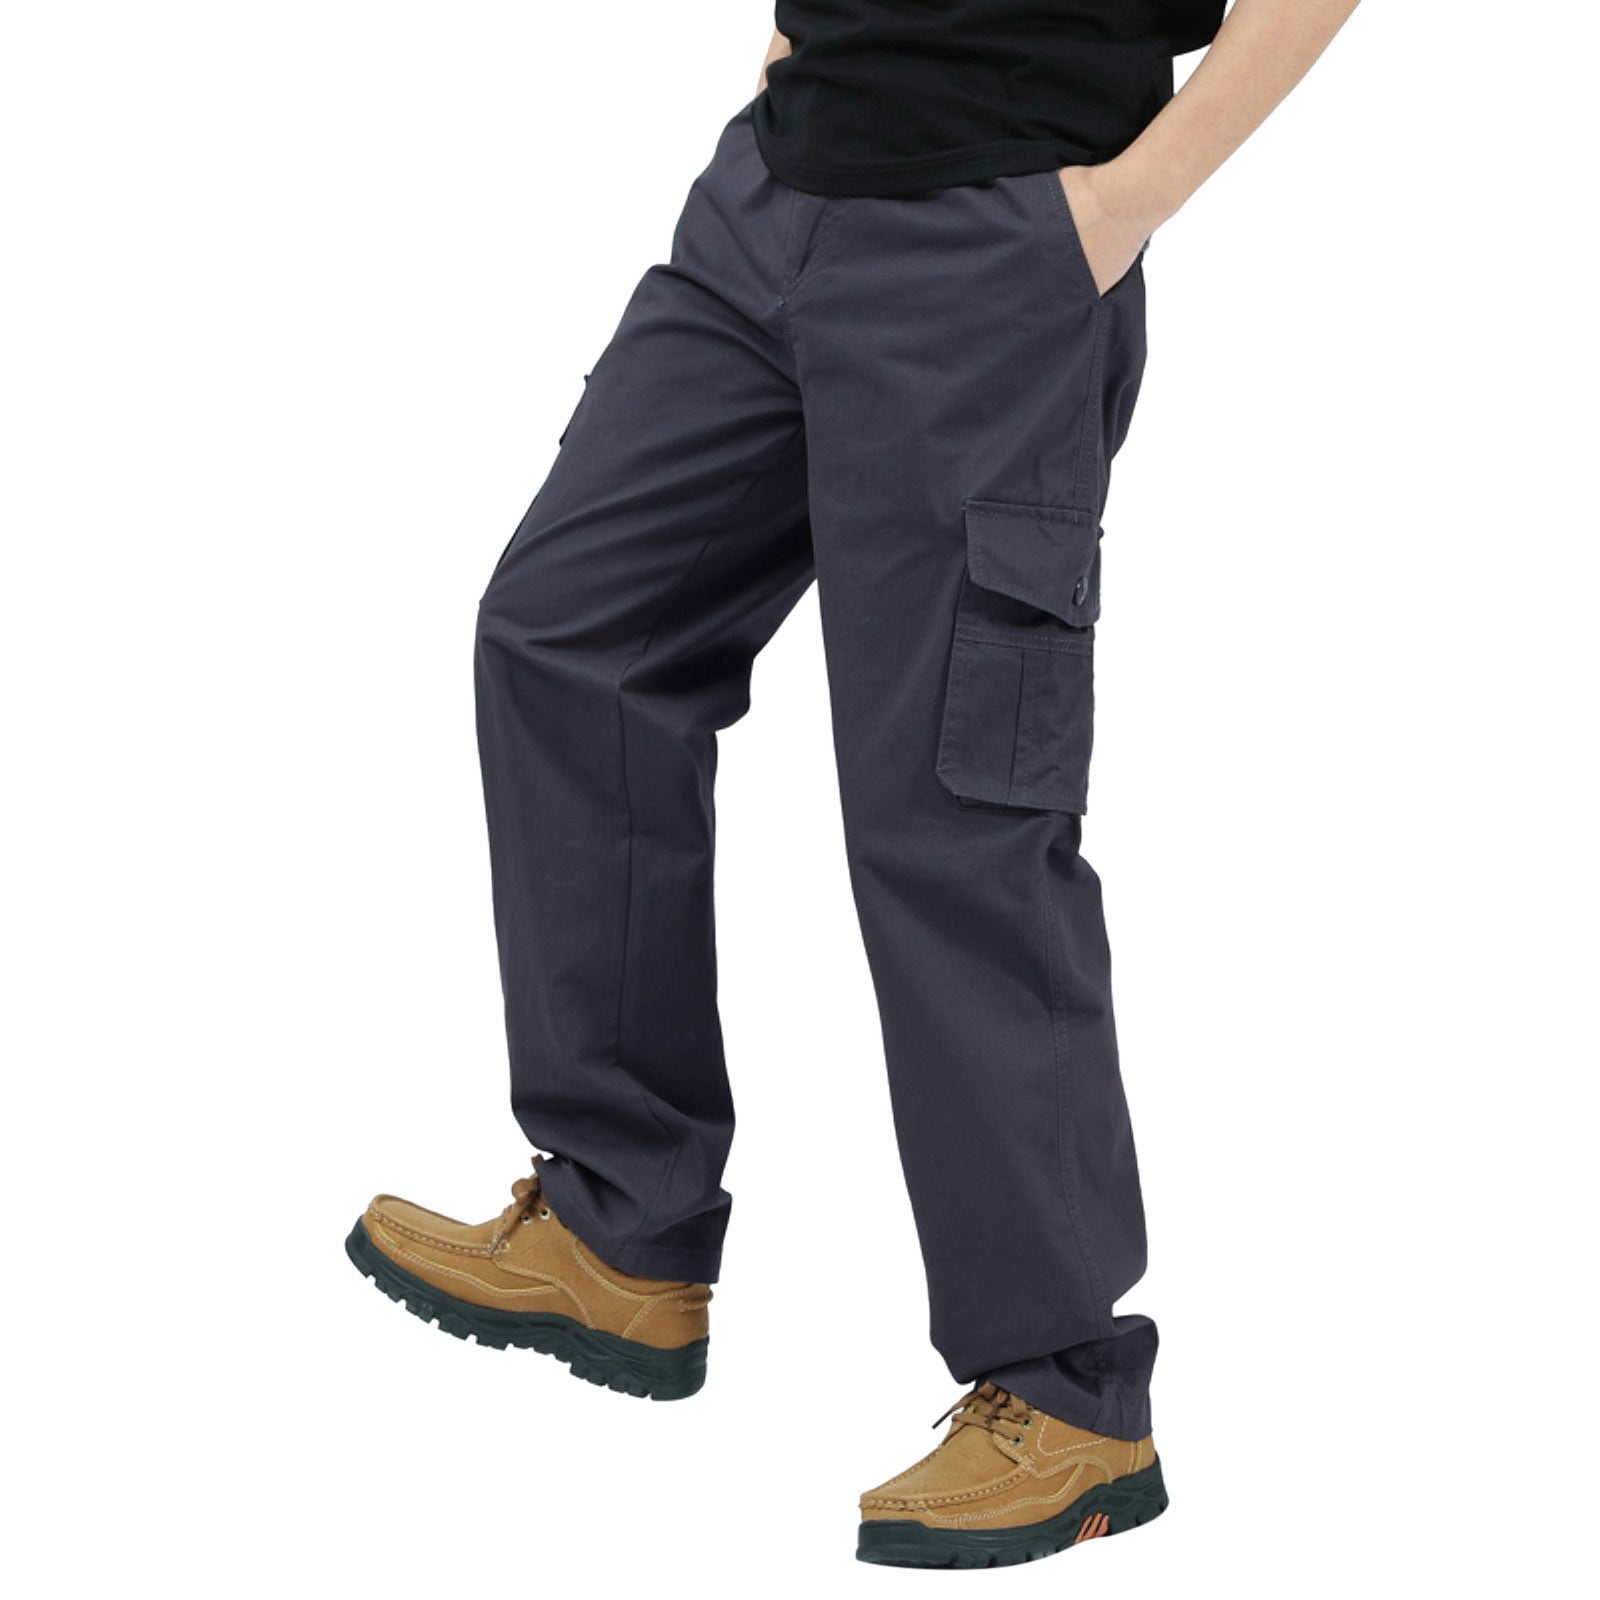 Mens Solid Color Summer Casual All Pants Fashionable Woven Long Cargo ...